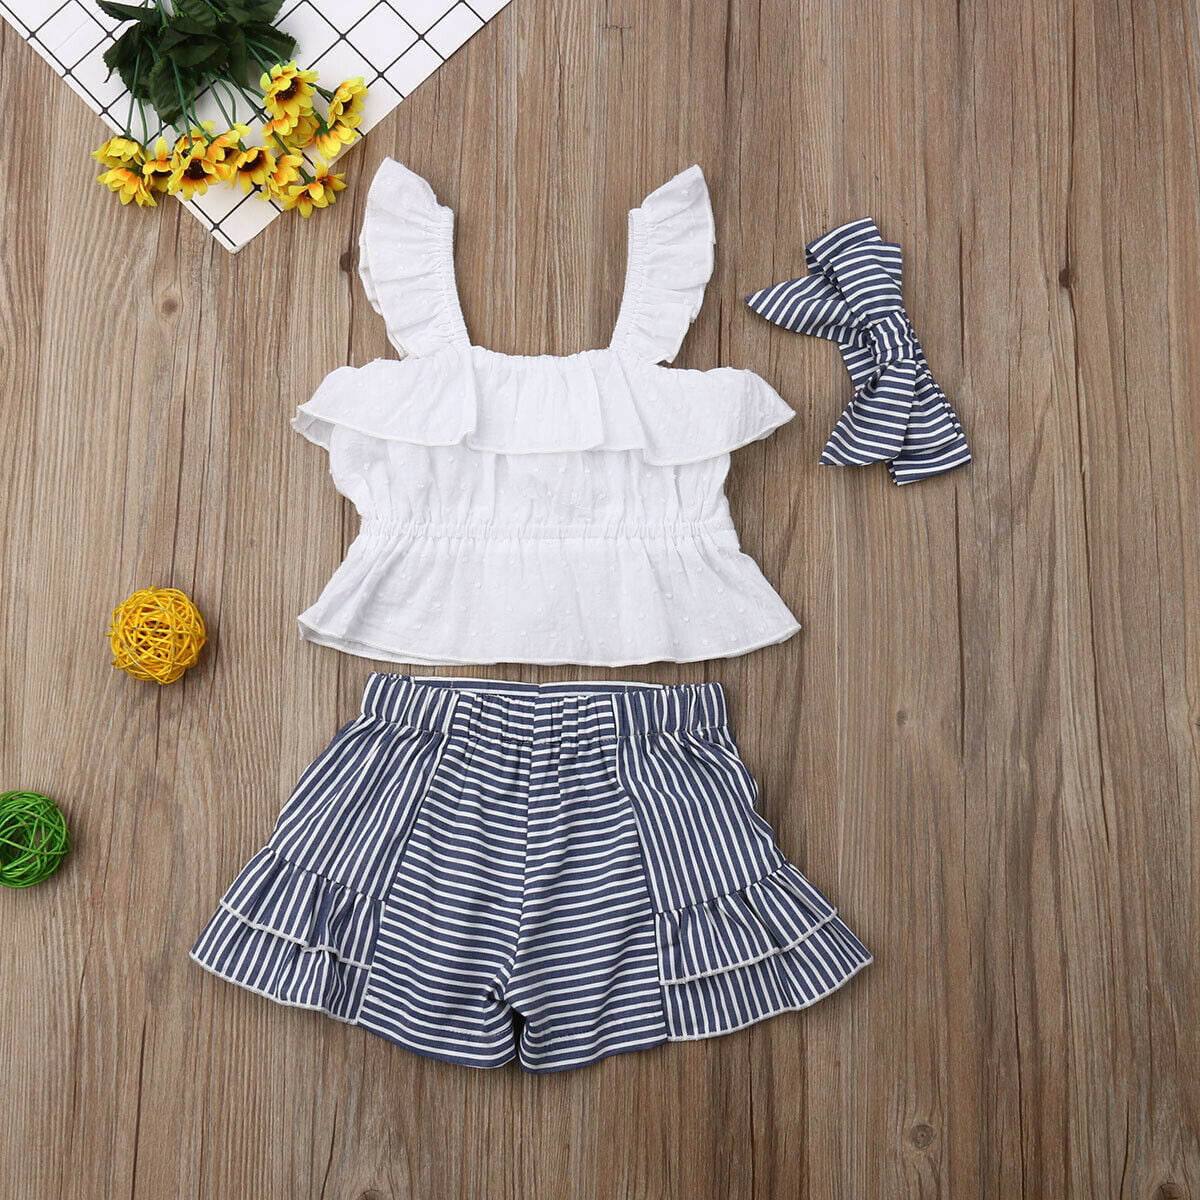 Toddler Baby Girls Sleeveless Pleated Crop Top+Striped Ruffle Shorts+Headband Outfits Summer 3 PCS Clothes Set